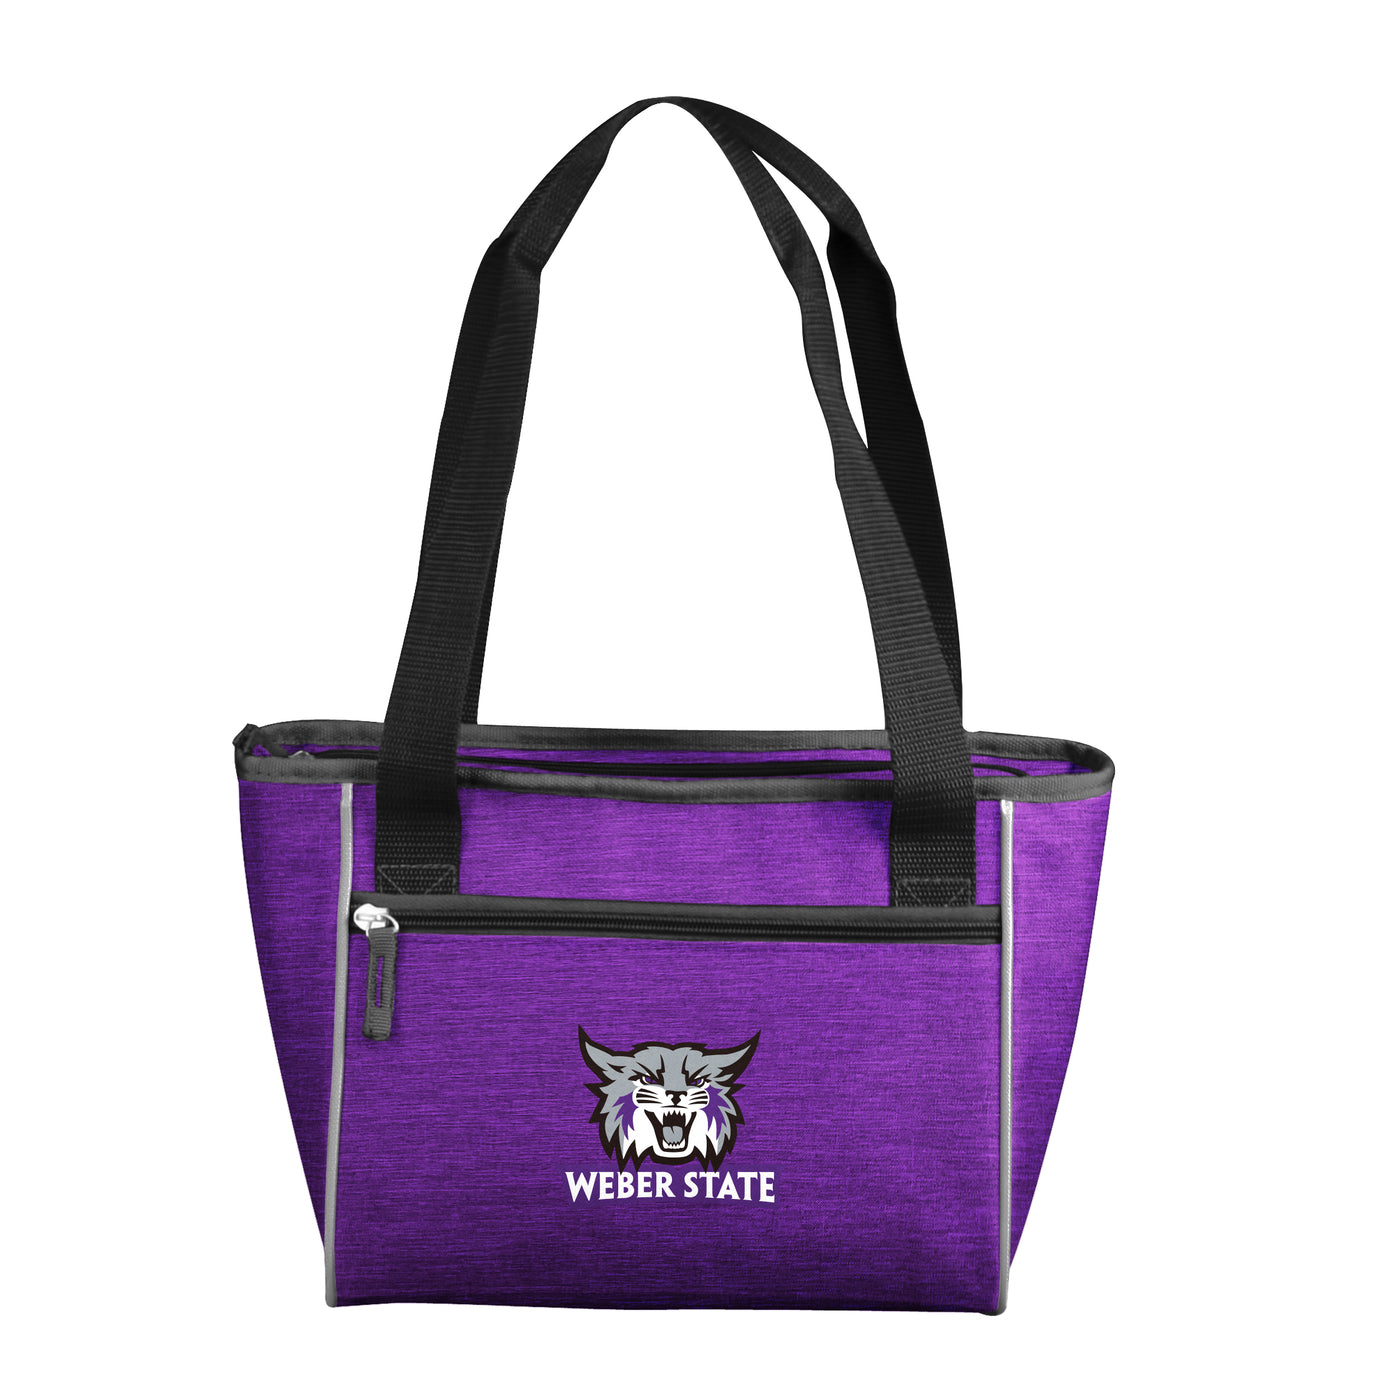 Weber State 16 Can Cooler Tote